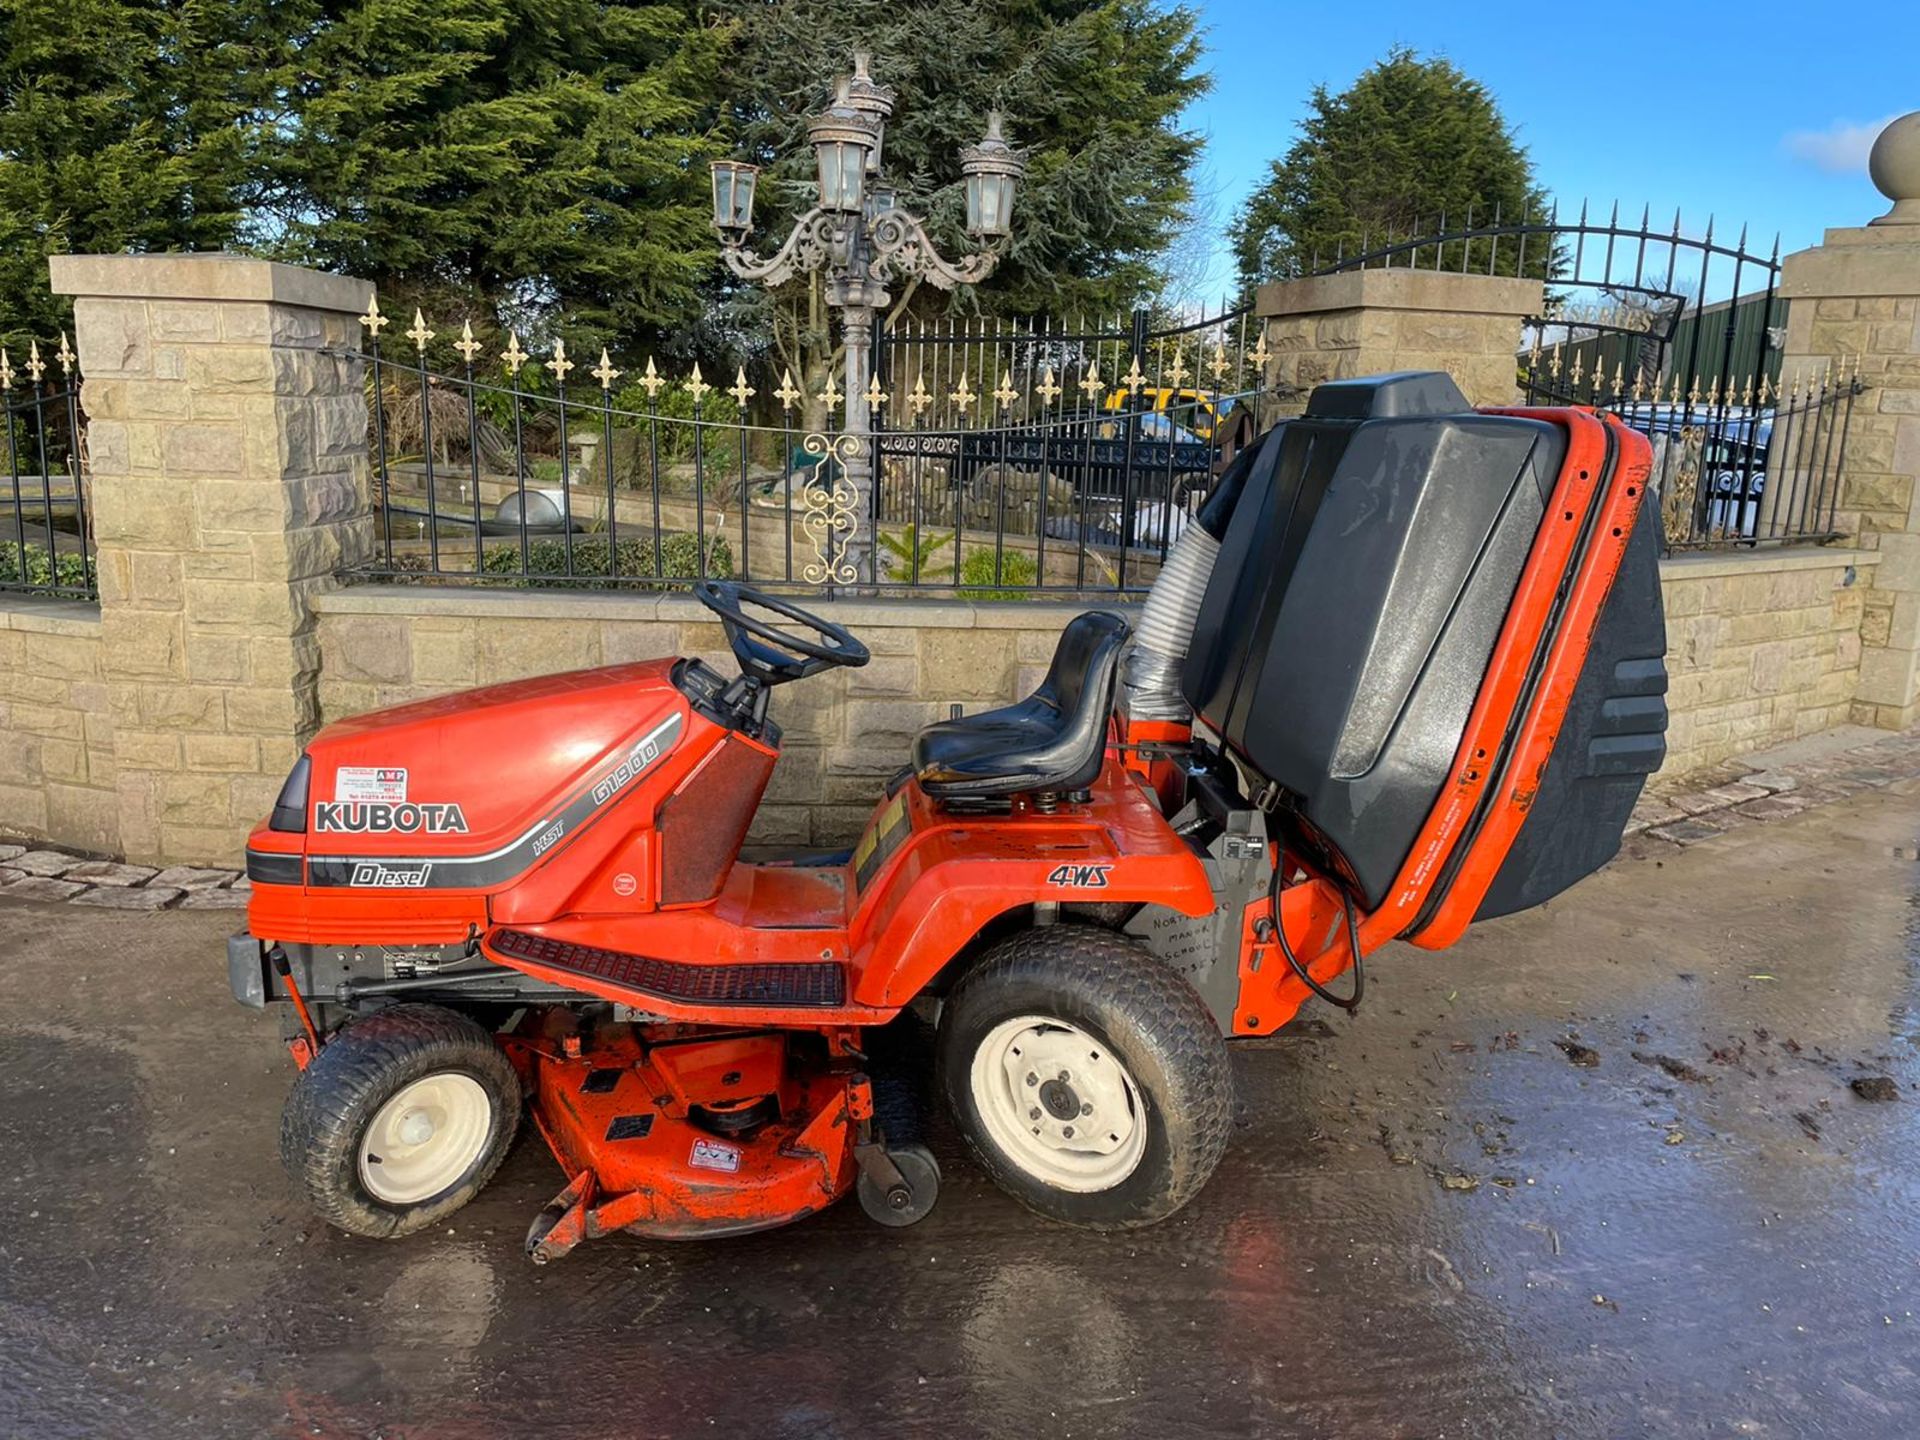 KUBOTA G1900 HST 4WS RIDE ON MOWER, RUNS, DRIVES AND CUTS, IN USED BUT GOOD CONDITION, 4 WHEEL STEER